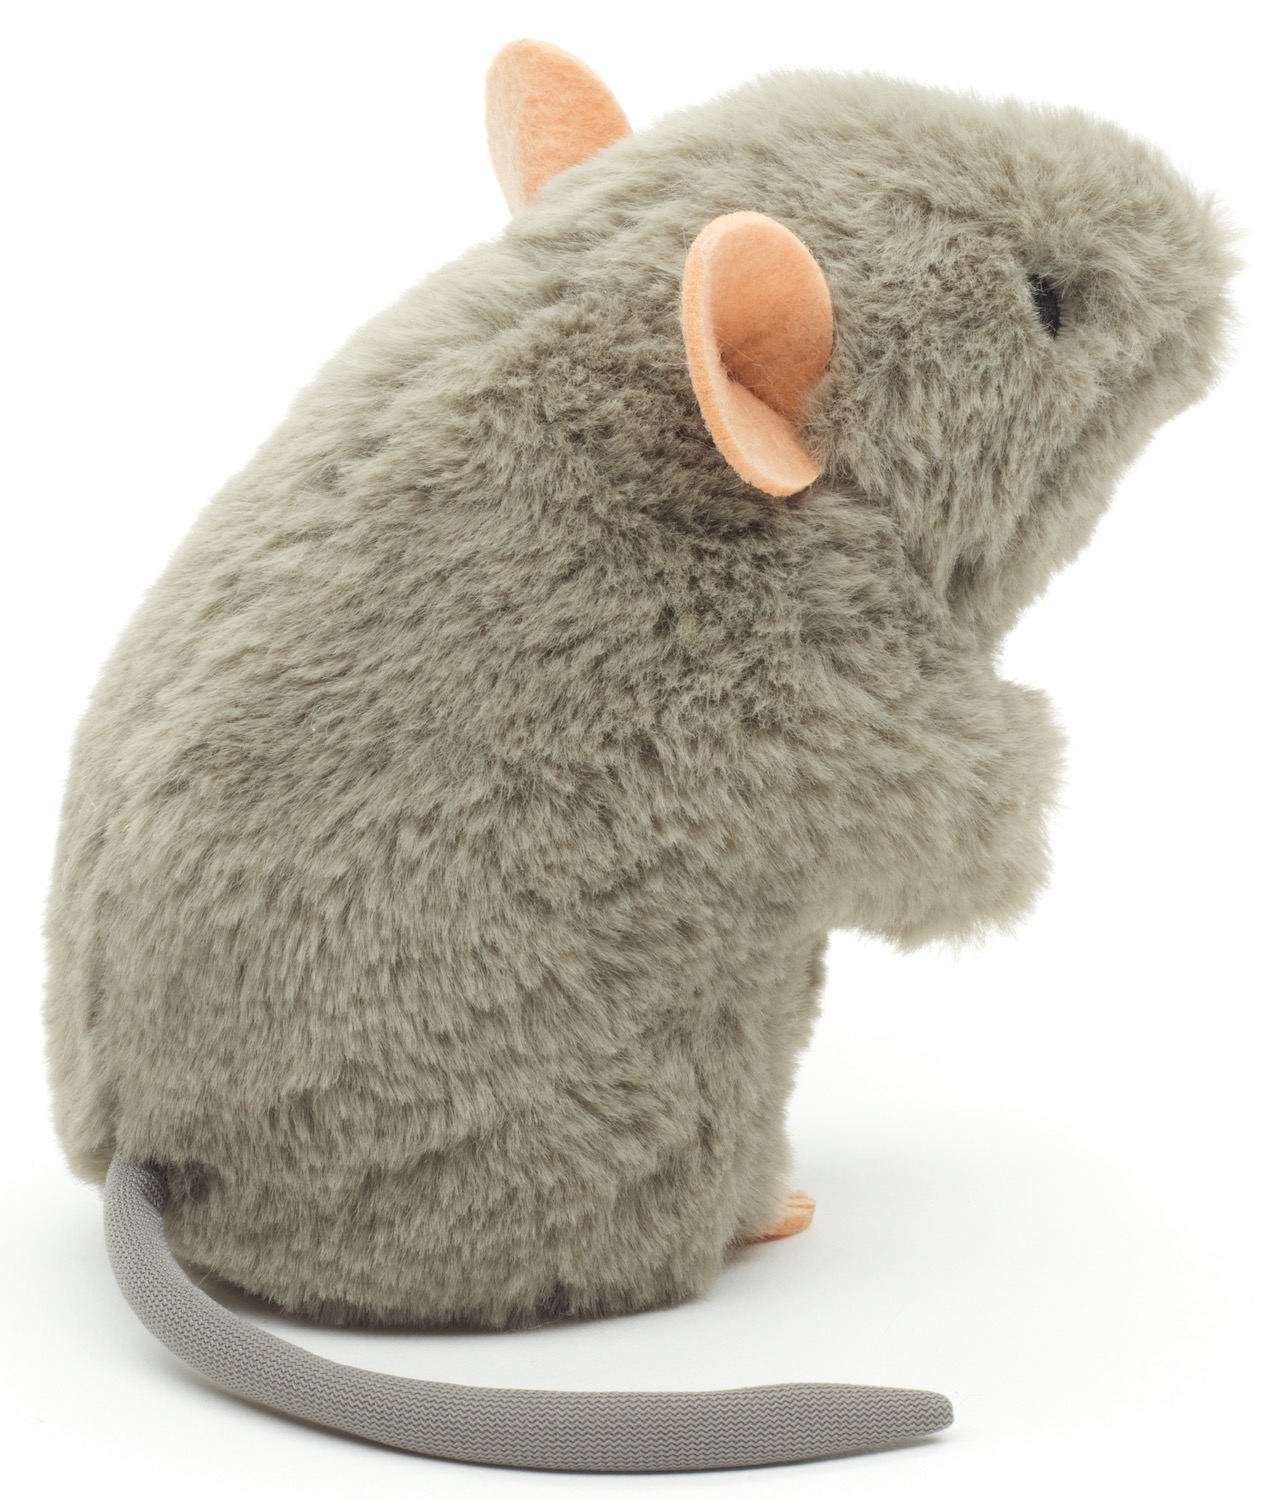 Eco-Line - Mouse grey, standing - 100% recycled material